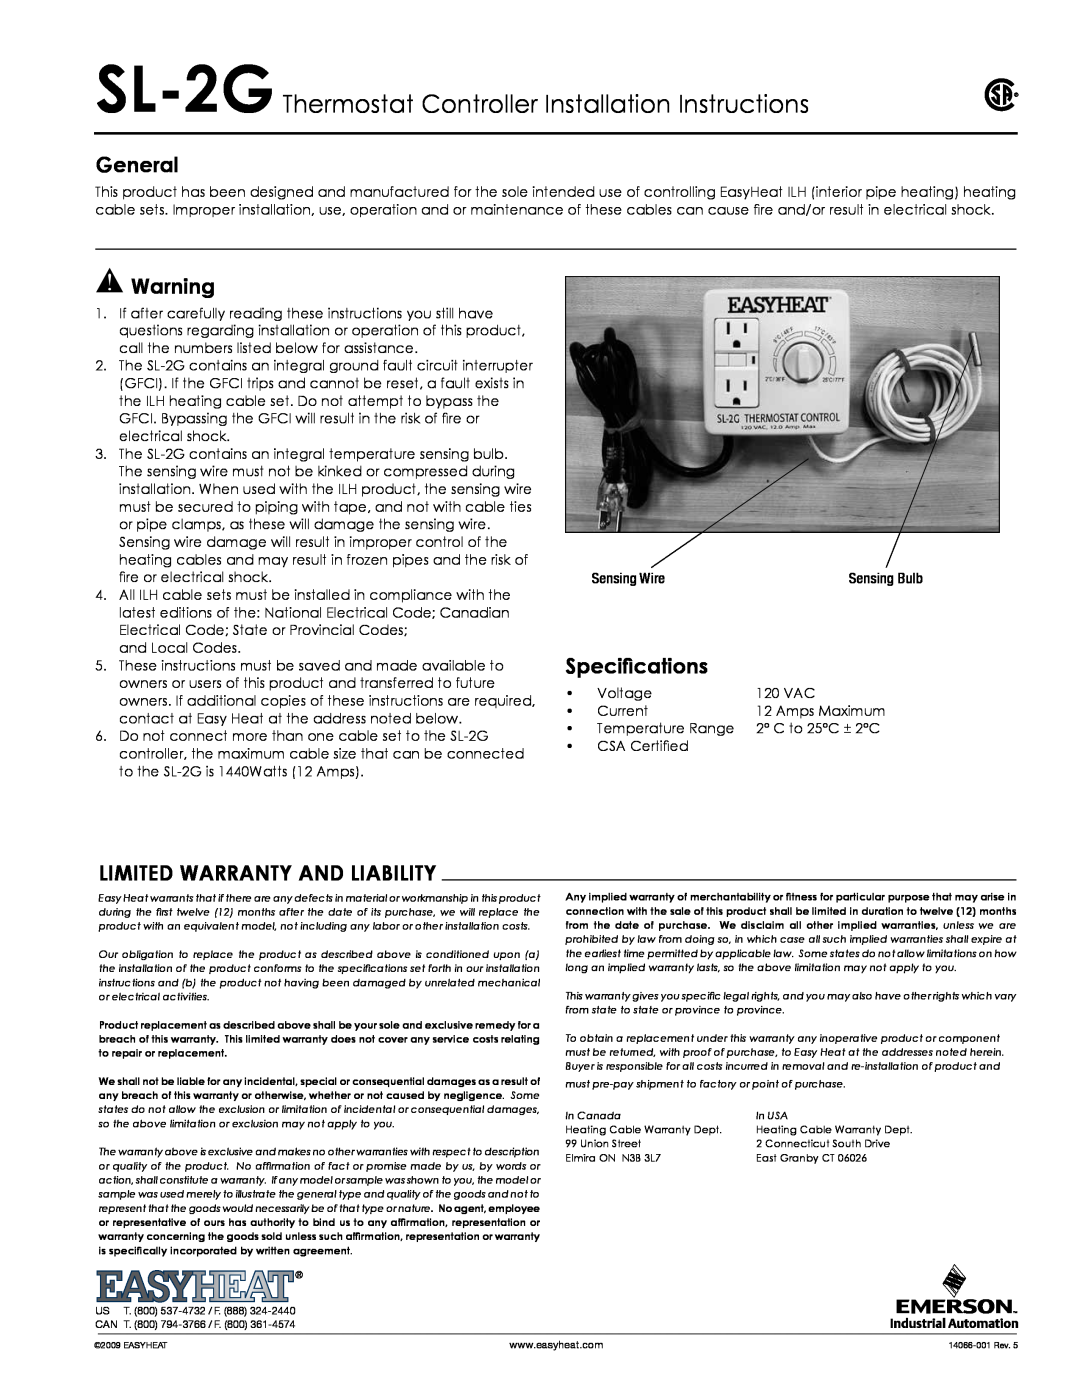 Emerson warranty SL-2G Thermostat Controller Installation Instructions, General, Specifications 